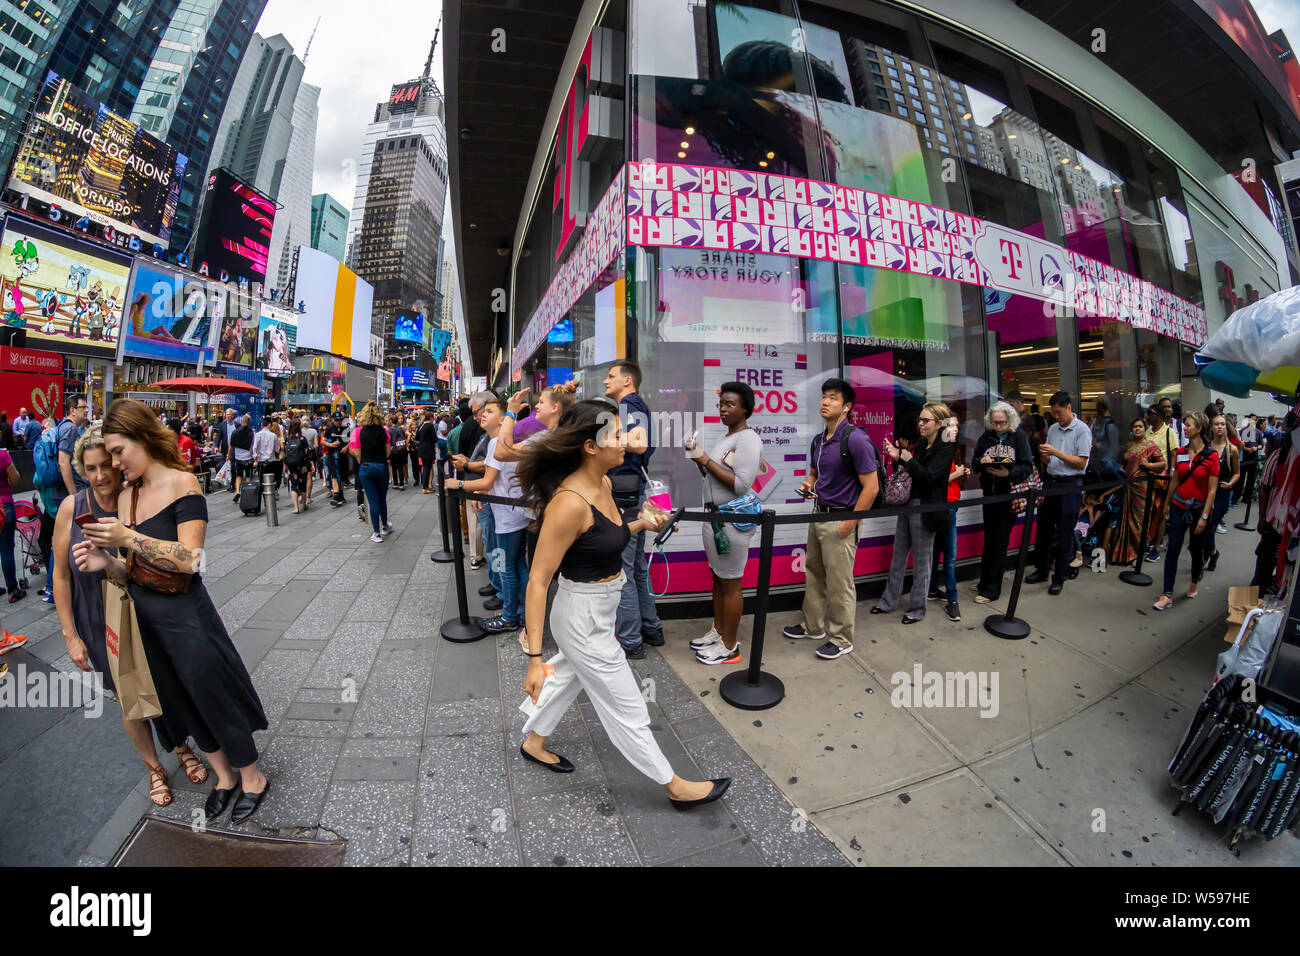 Hundreds of taco lovers descend on the T-Mobile store in Times Square in New York on Taco Tuesday, July 23, 2019 for TacoBell tacos, T-MoBell Freeze slushies and assorted free swag. The collaboration with Taco Bell rebranded the stores as ÒT-MoBellÓ. The crossover event takes over the store for three days bringing in the mobile phone loving, taco eating demographic. (© Richard B. Levine) Stock Photo